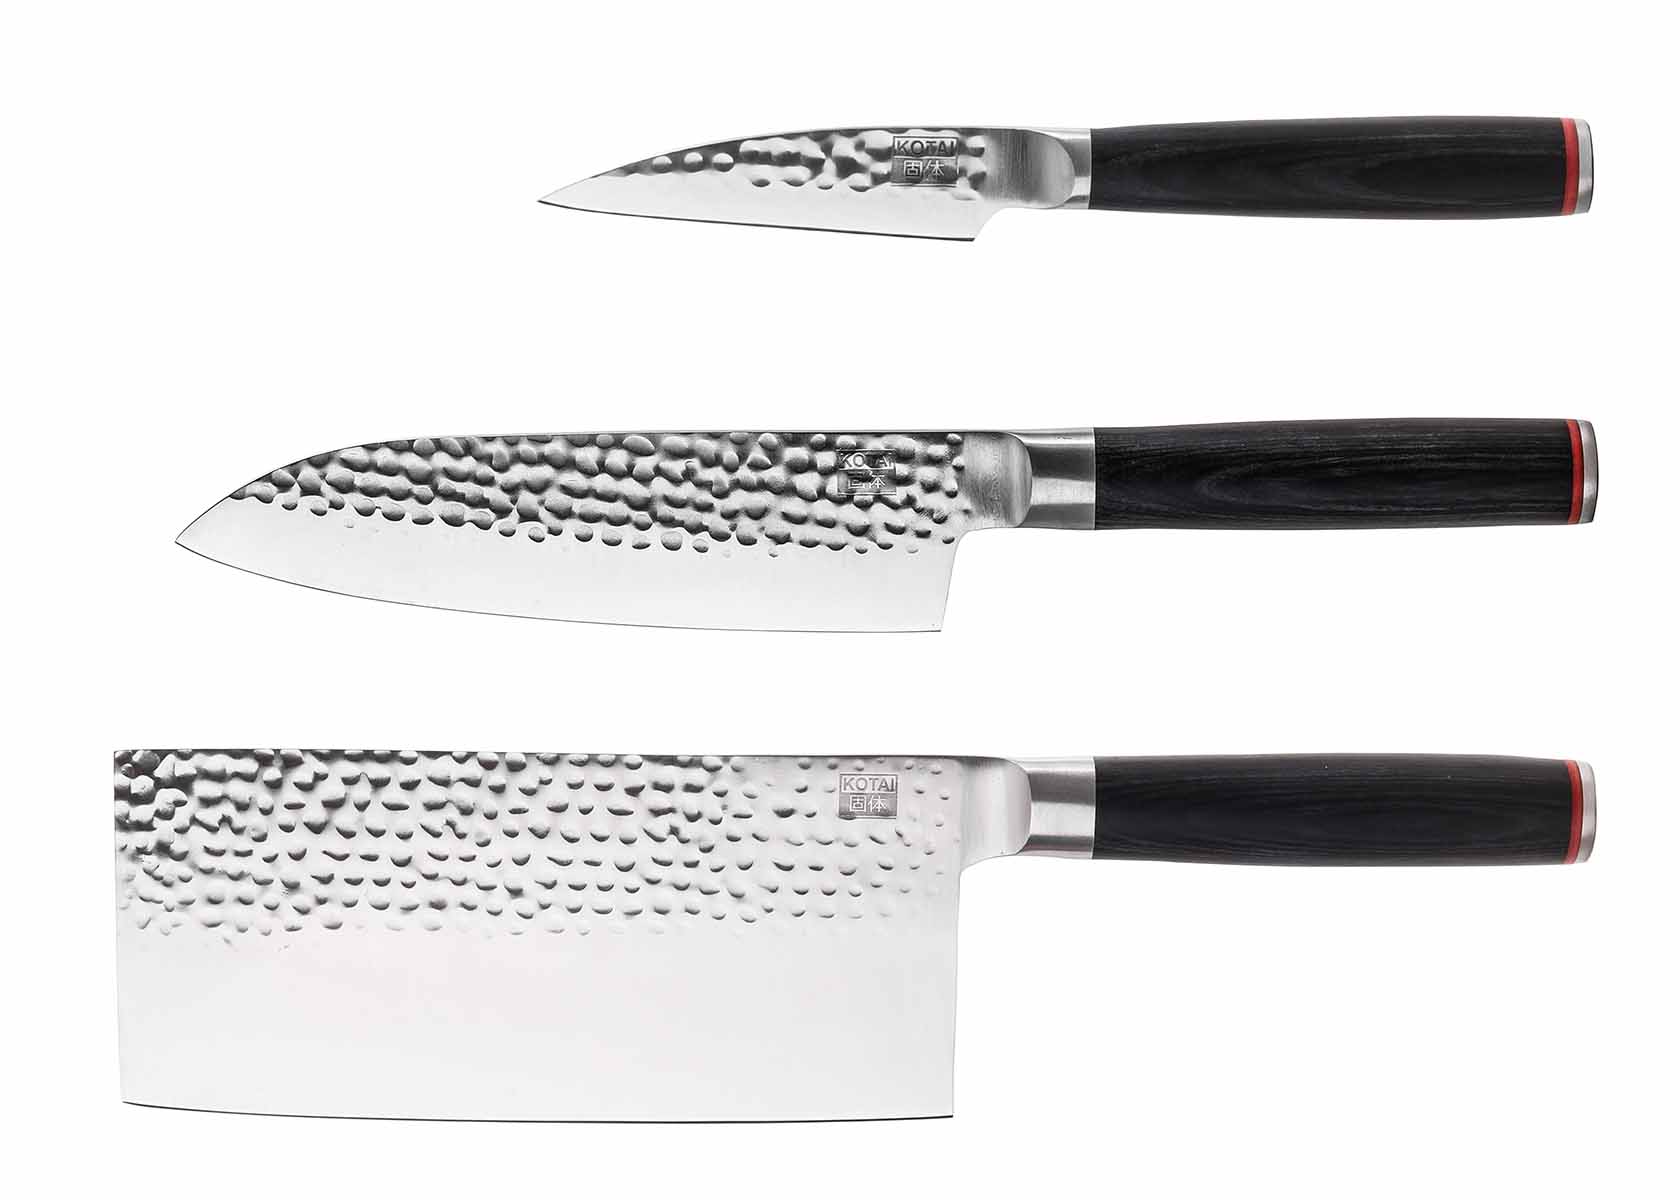 KOTAI Pakka Asian 3 Piece Knife Set with paring, Santoku and cleaver hammered knives on white background.